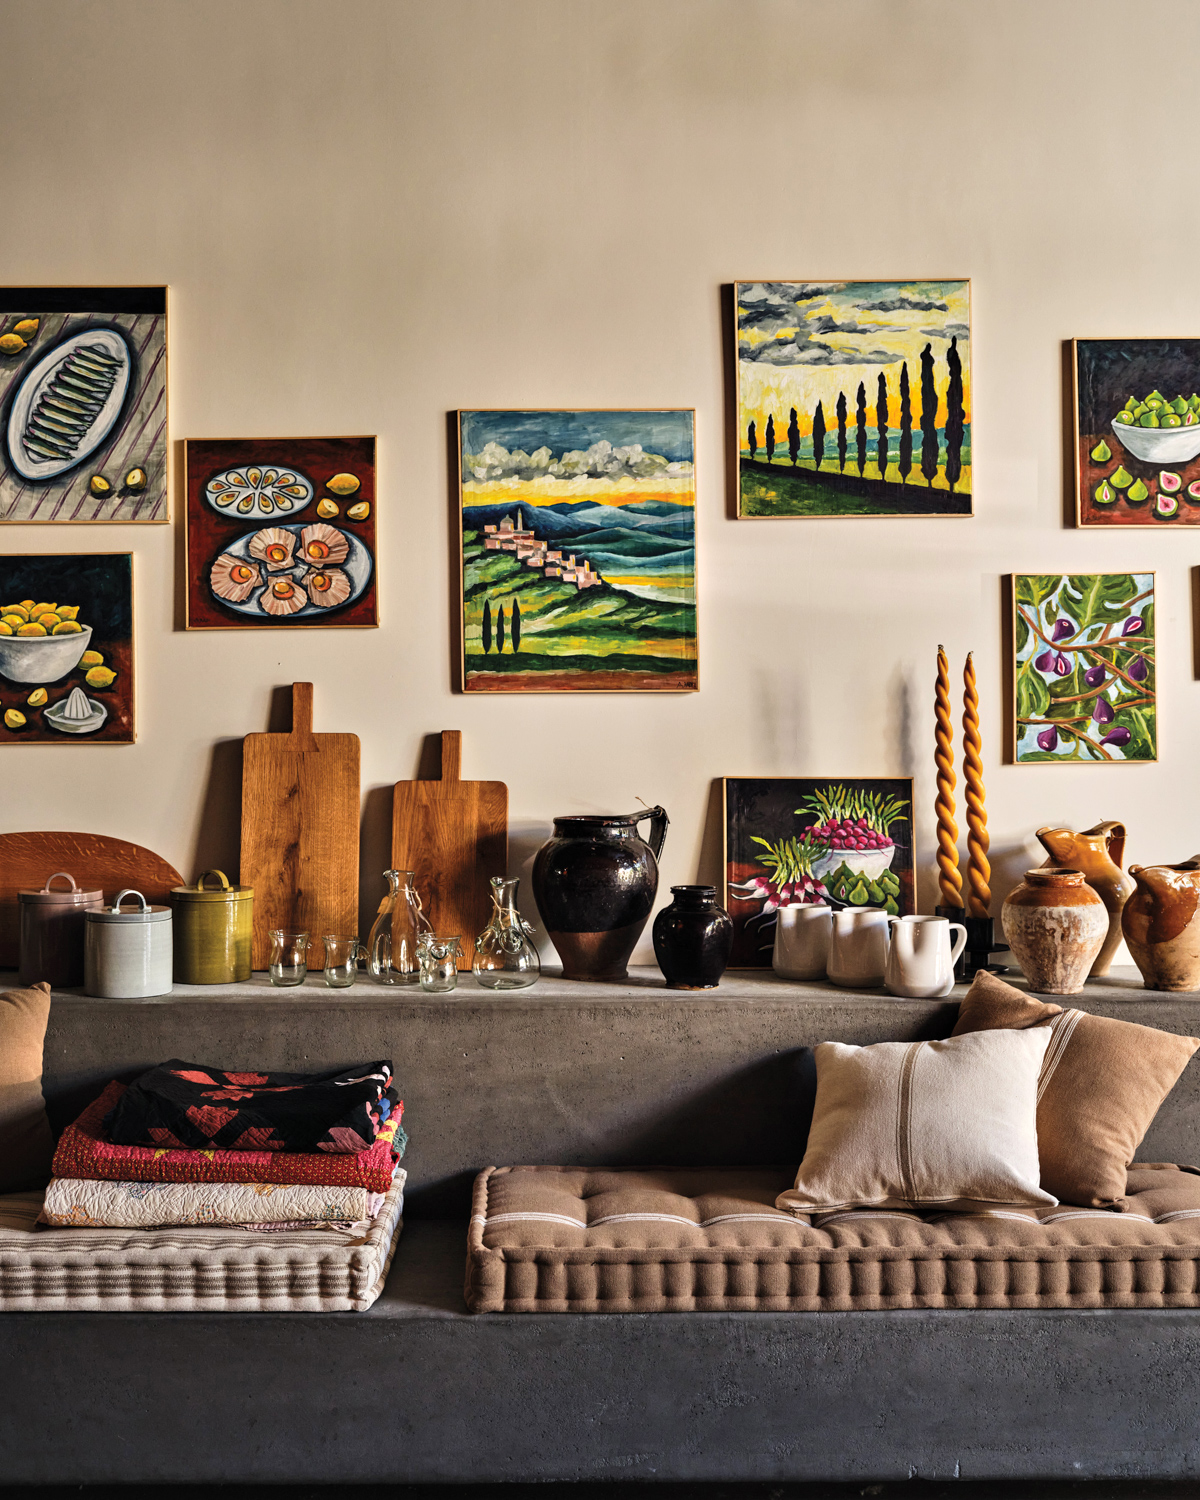 Painted artwork, kitchenware and home decor items on display at il Buco Vita